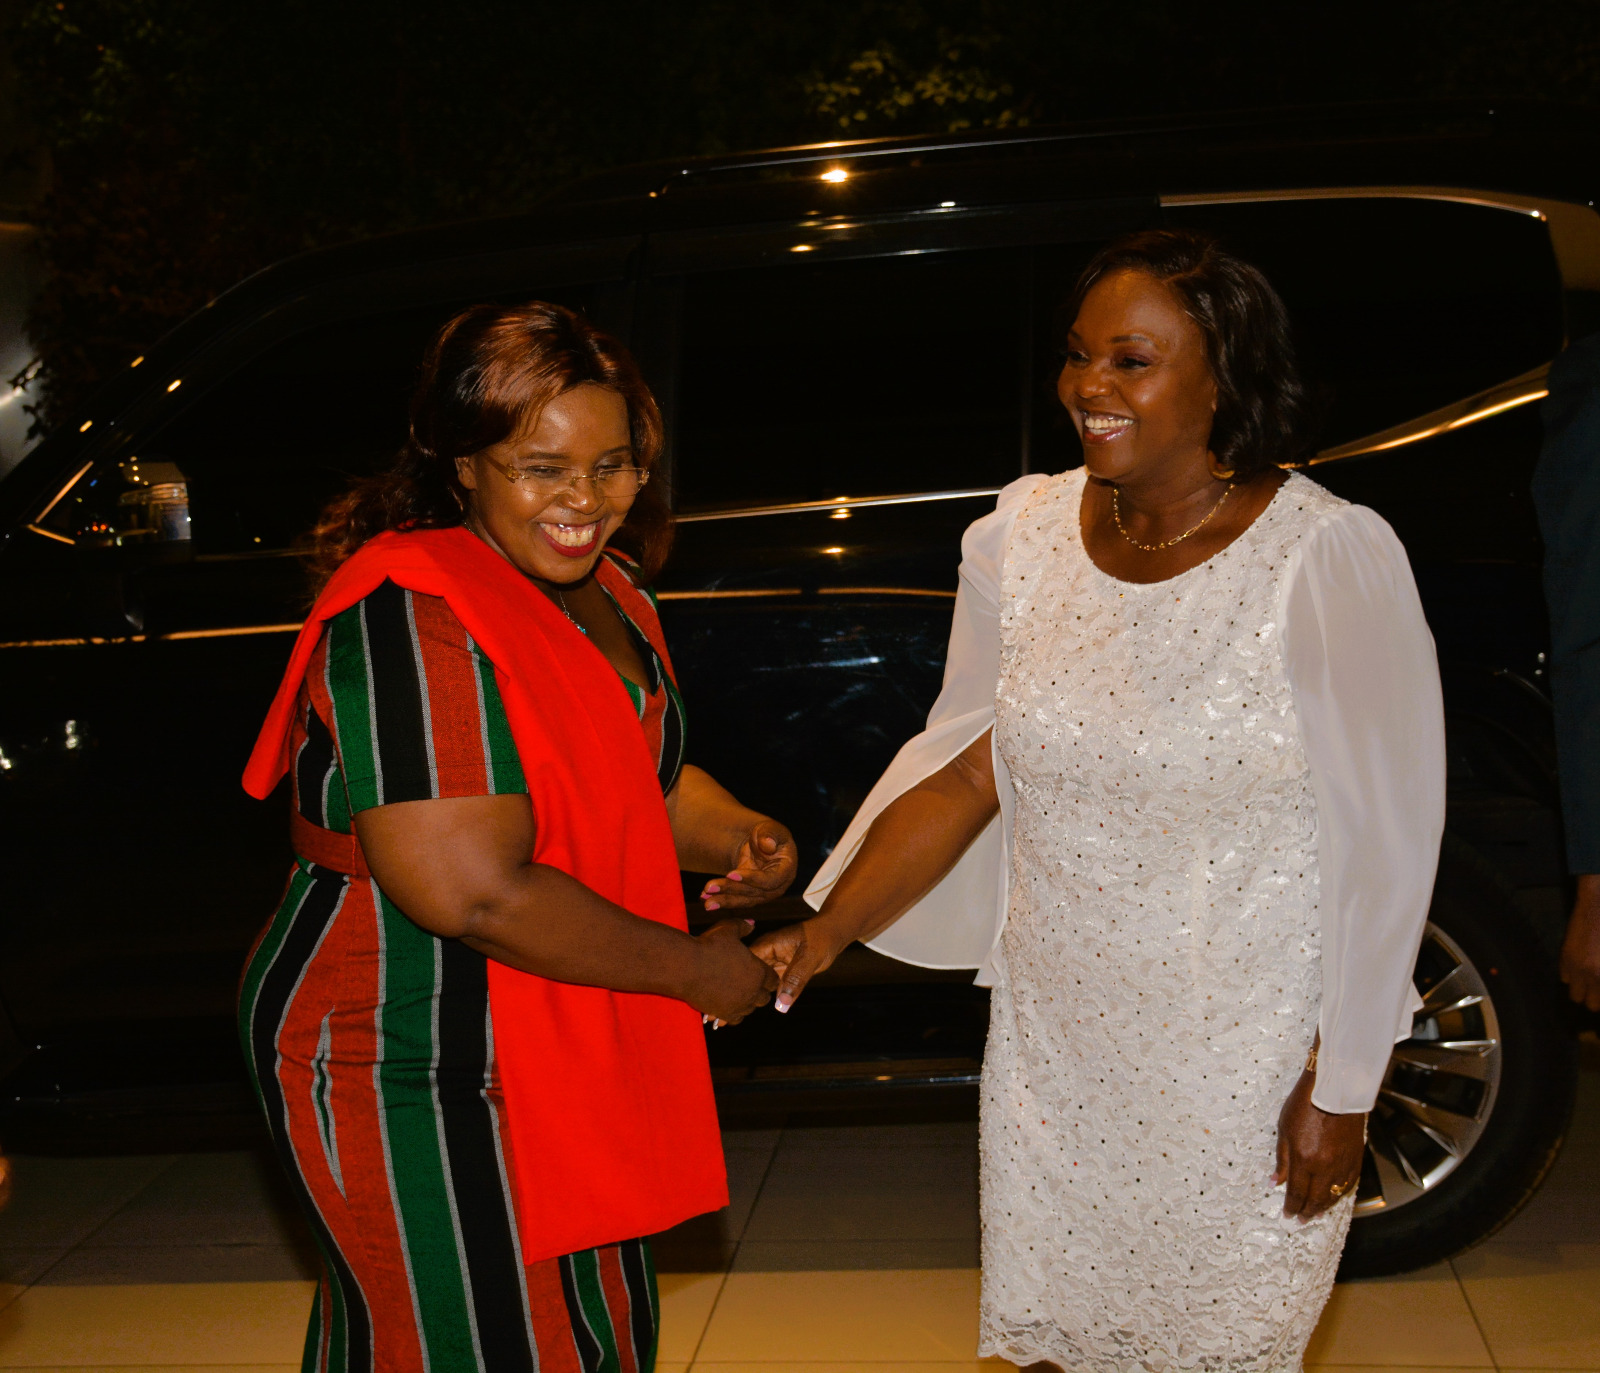 The Cabinet Secretary for Tourism, Wildlife and Heritage, Hon. Peninah Malonza (left), welcoming the Second Lady of the Republic of Kenya, H.E pastor Dr. Dorcas Rigathi (right).